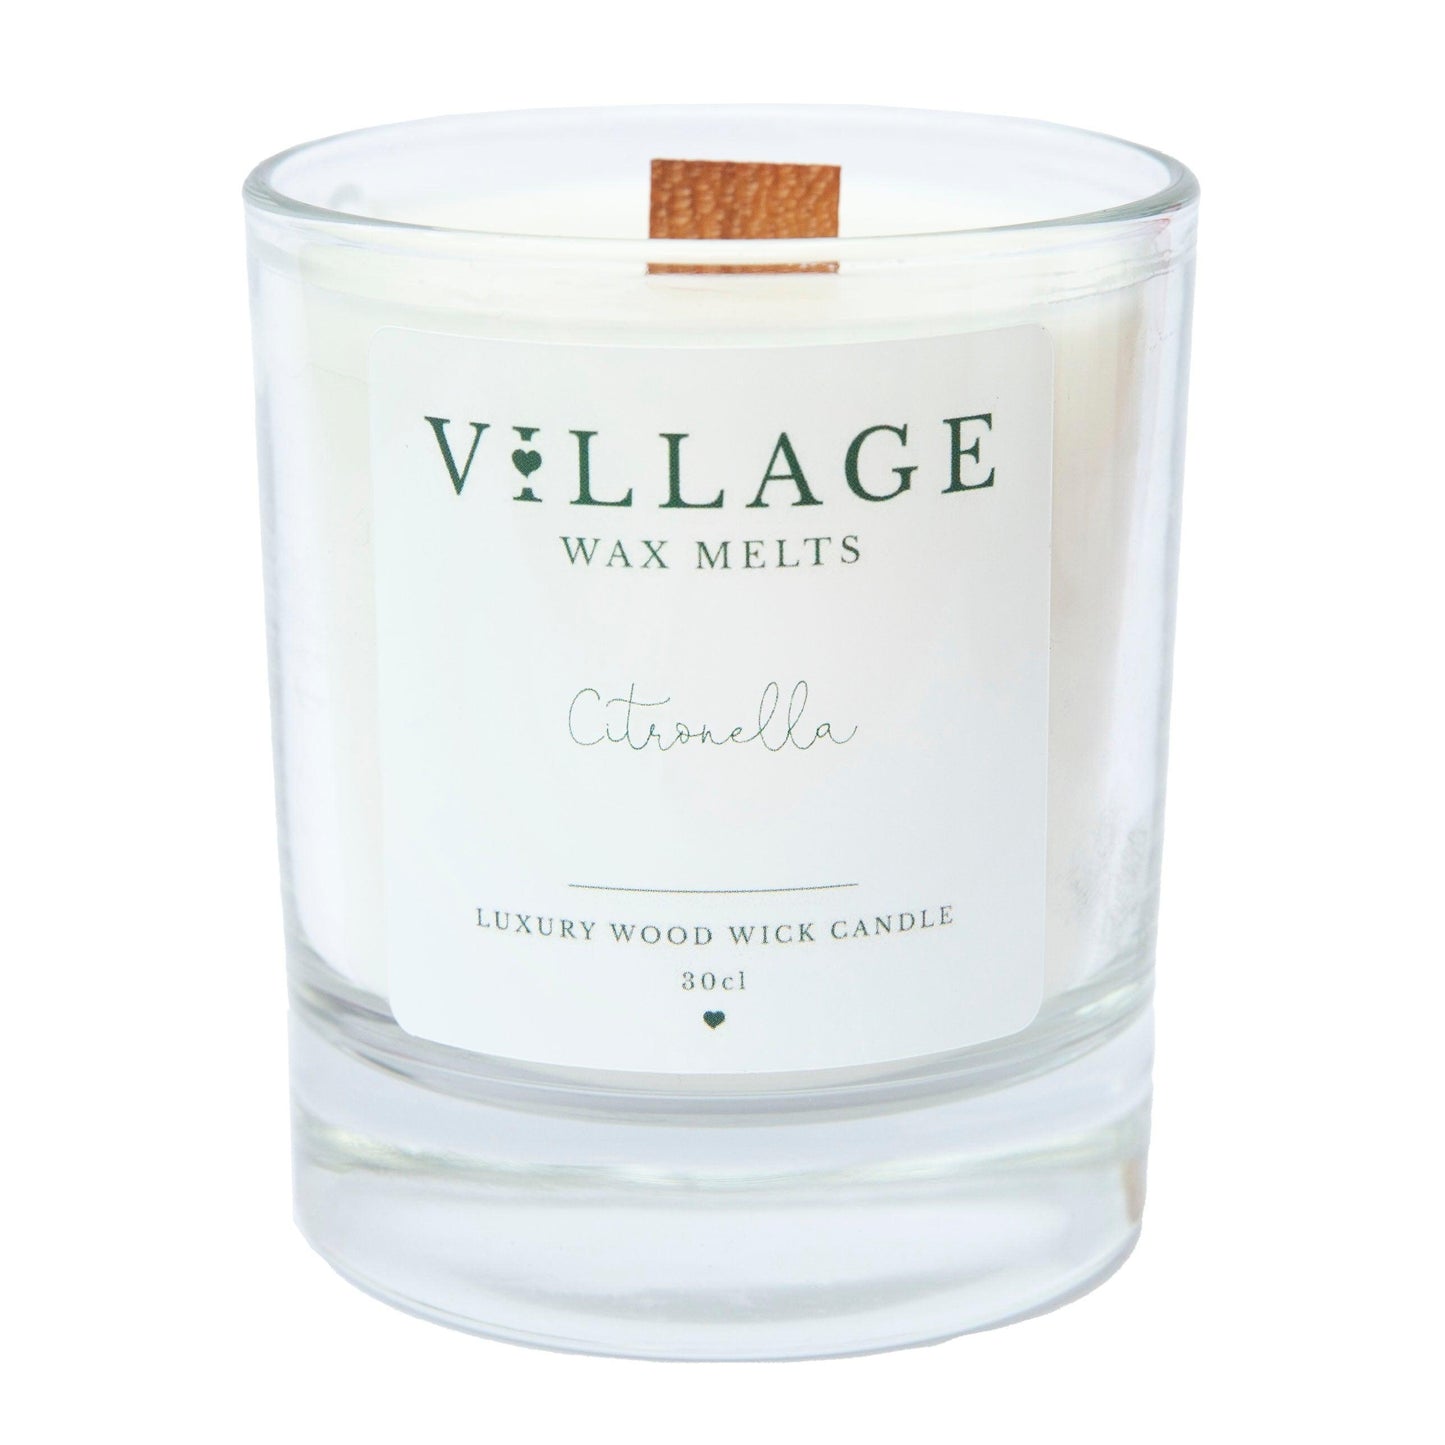 Citronella (Mosquito/Bug Repellent) Essential Oil Wood Wick Candle - Village Wax Melts